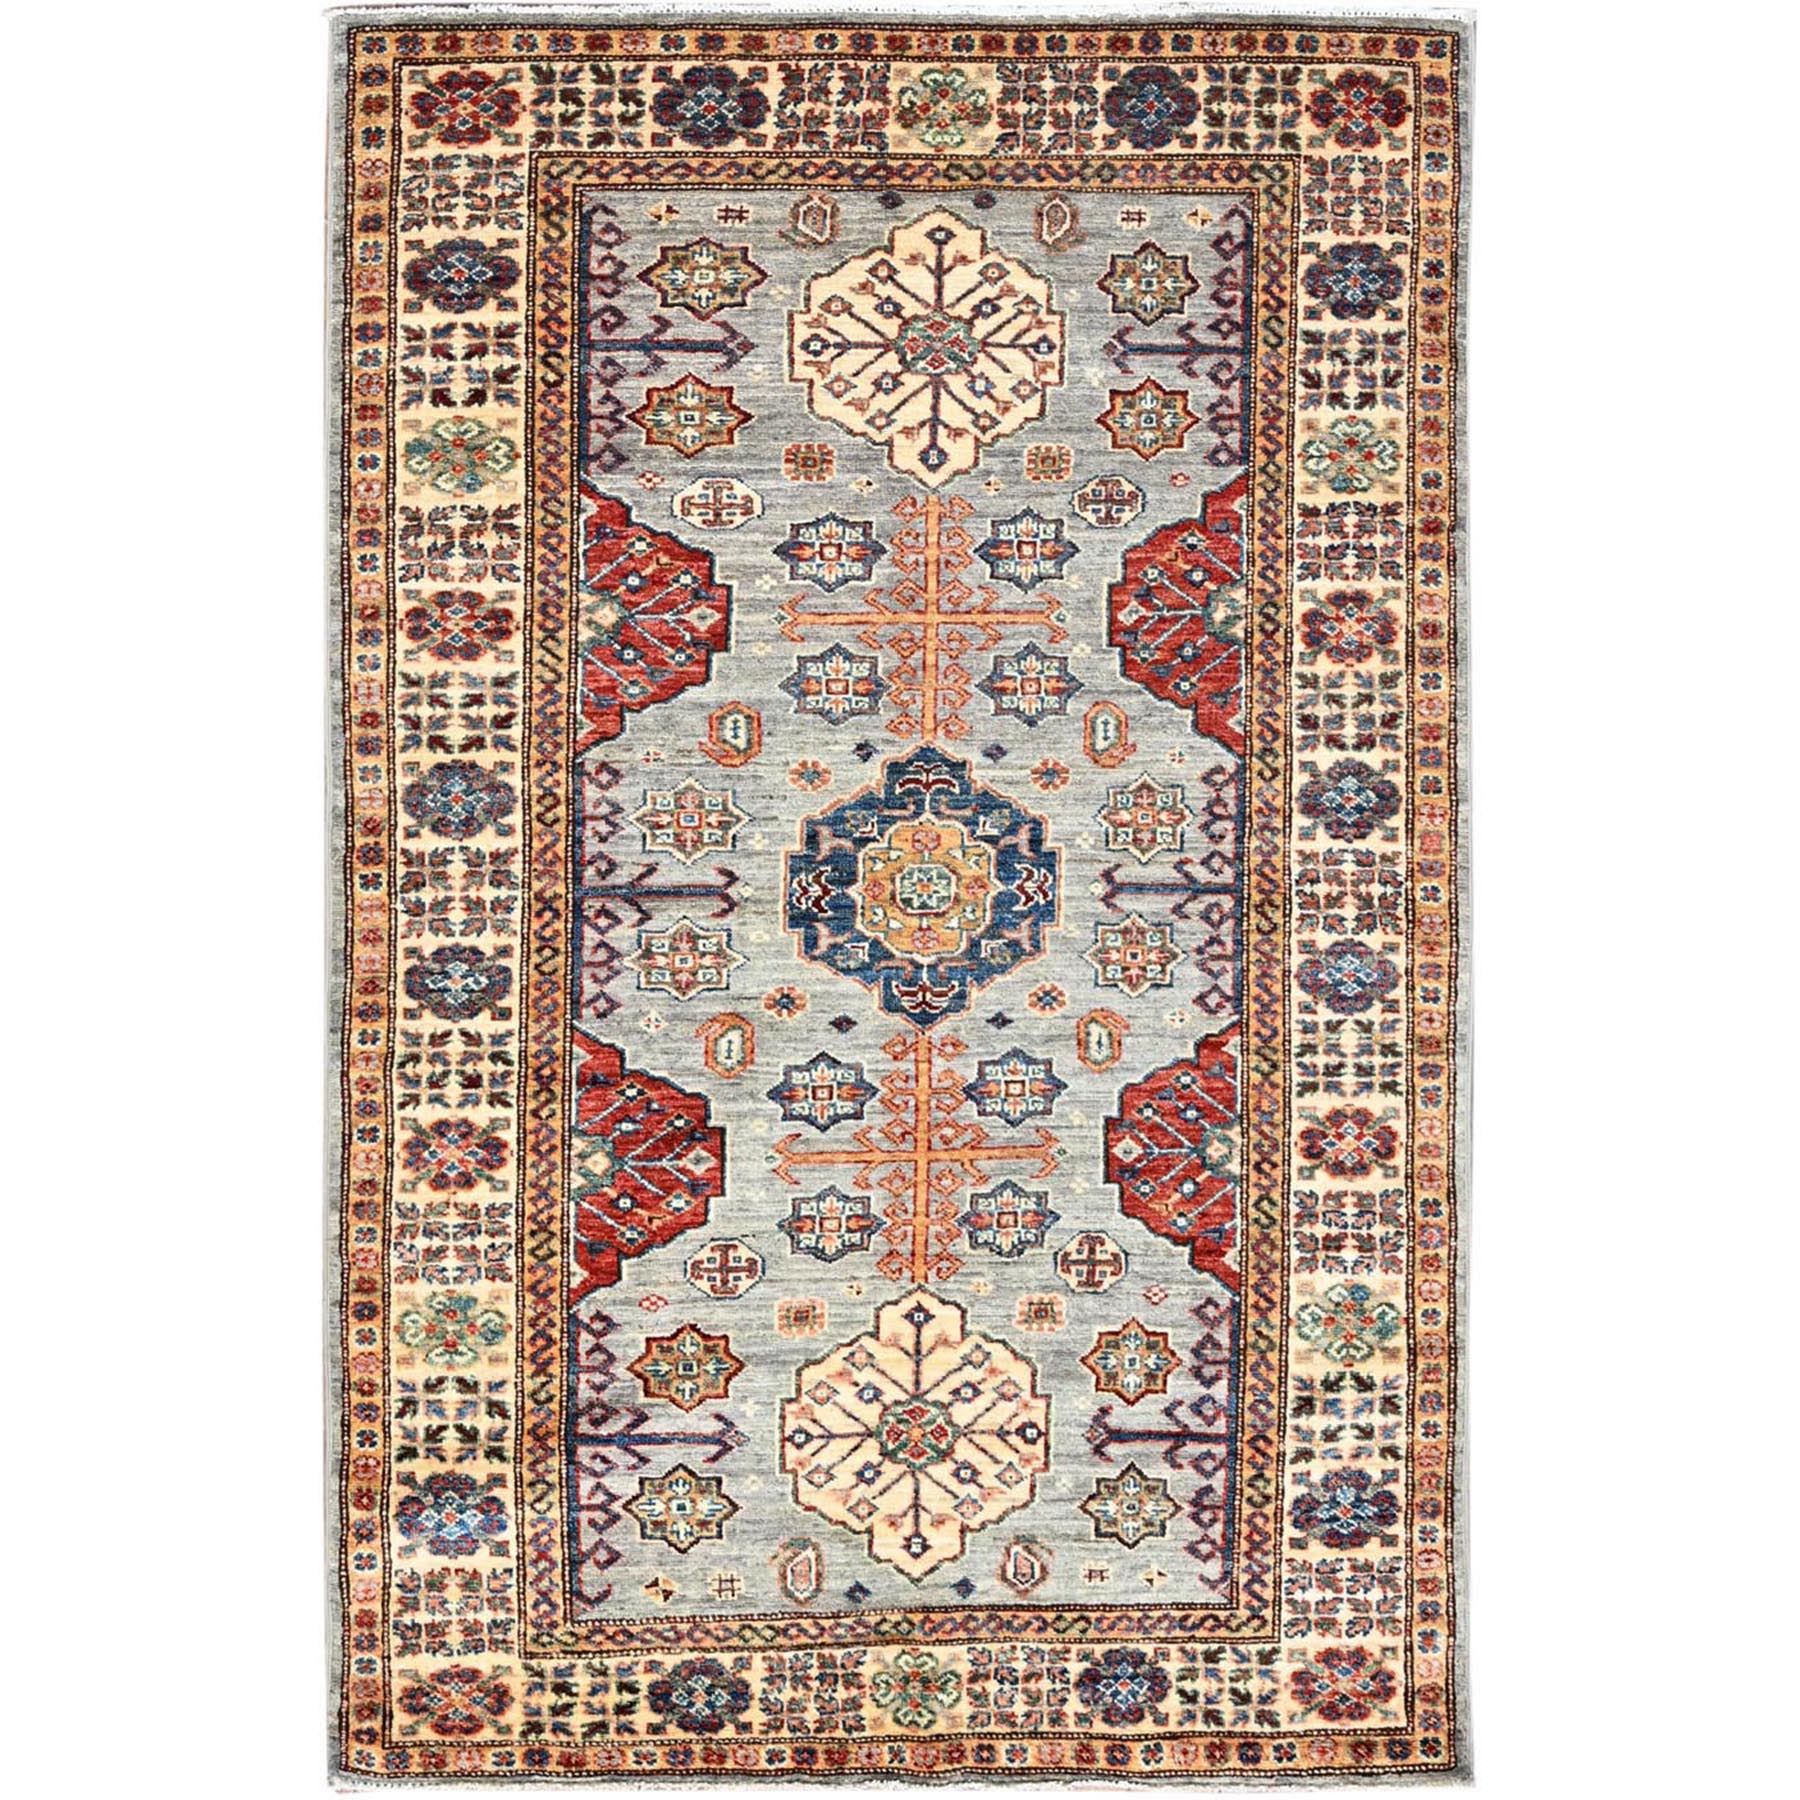  Wool Hand-Knotted Area Rug 3'11